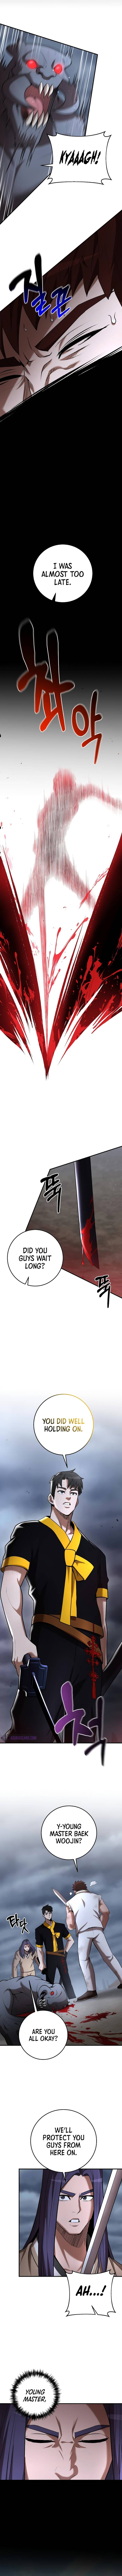 I Became a Renowned Family’s Sword Prodigy Chapter 60 page 6